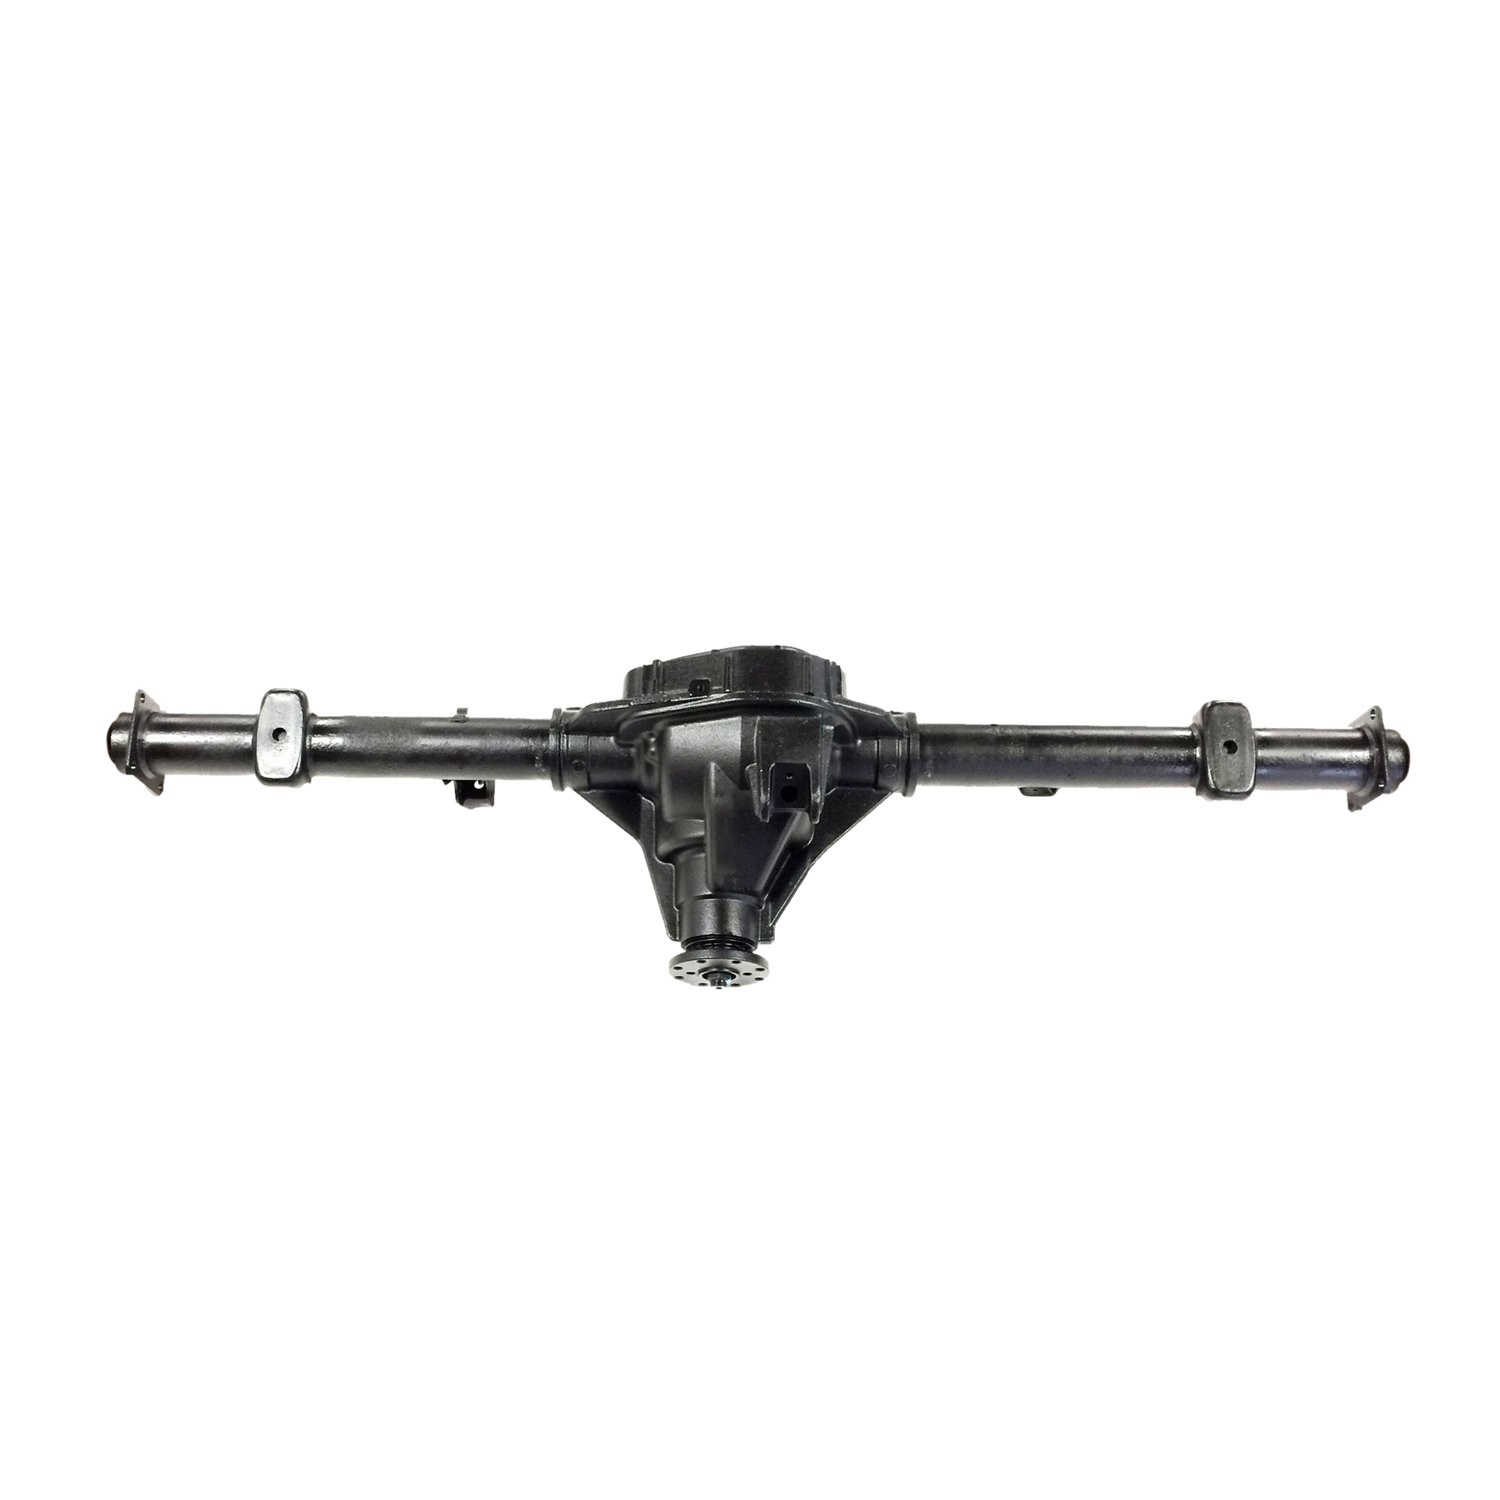 Remanufactured Complete Axle Assy for 9.75" 98-99 Expedition 3.31, Posi LSD *Check Tag*